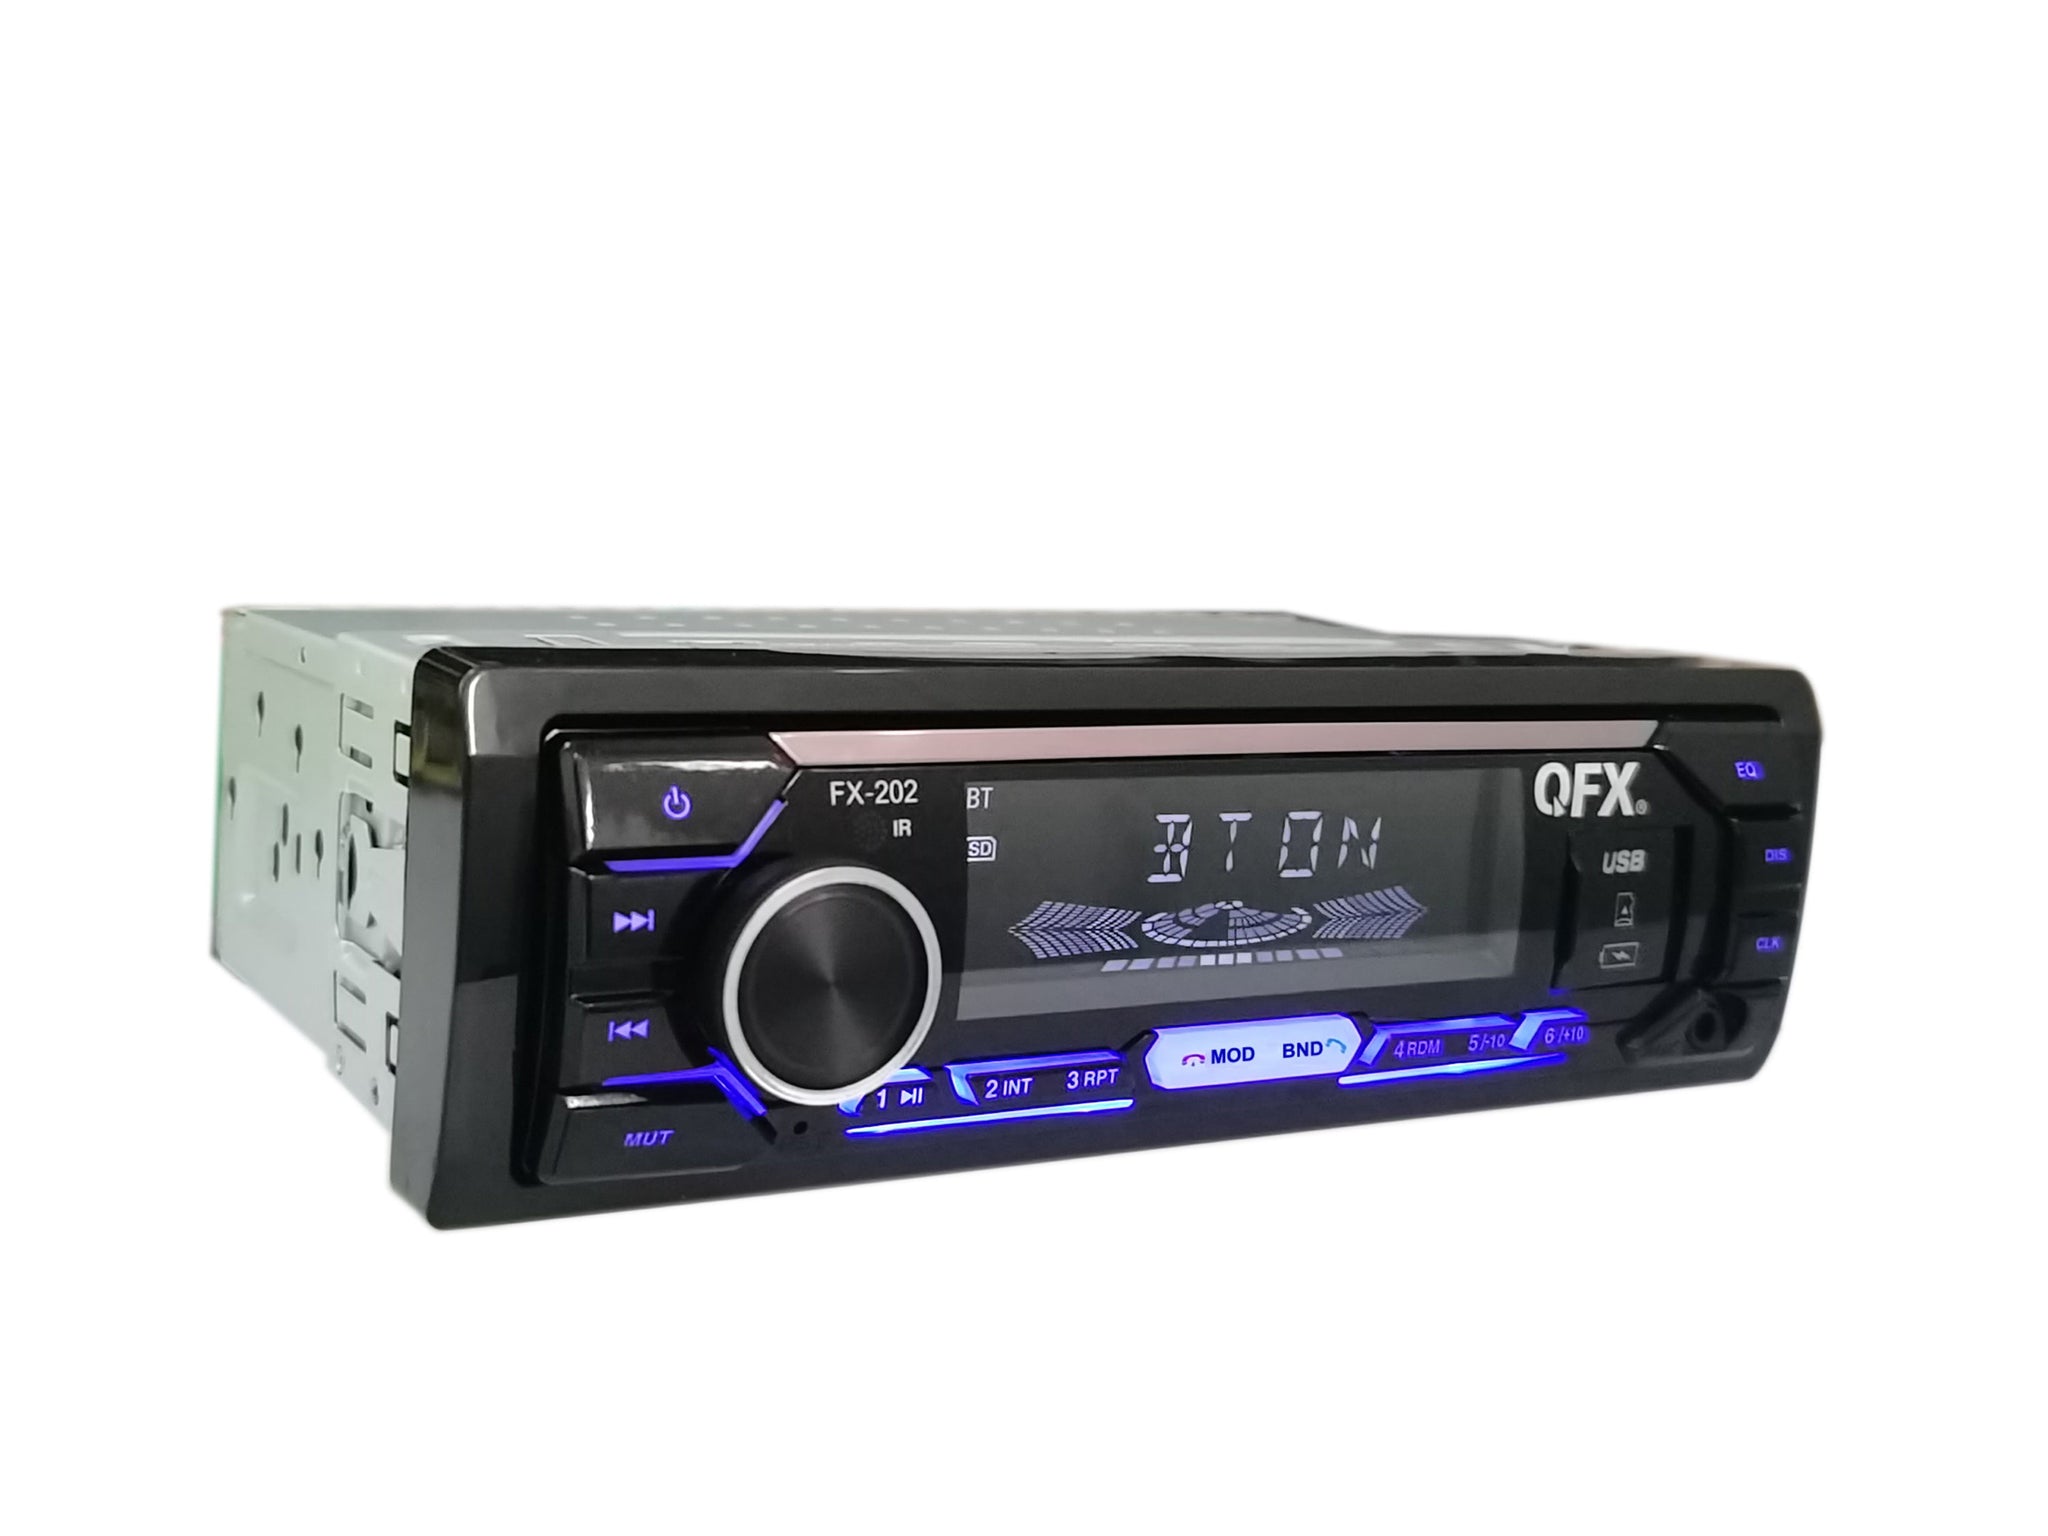 Verbazing vacature Zielig QFX FX-202 Car Stereo Bluetooth AM/FM Radio MP3 Player – Amazing Electronics